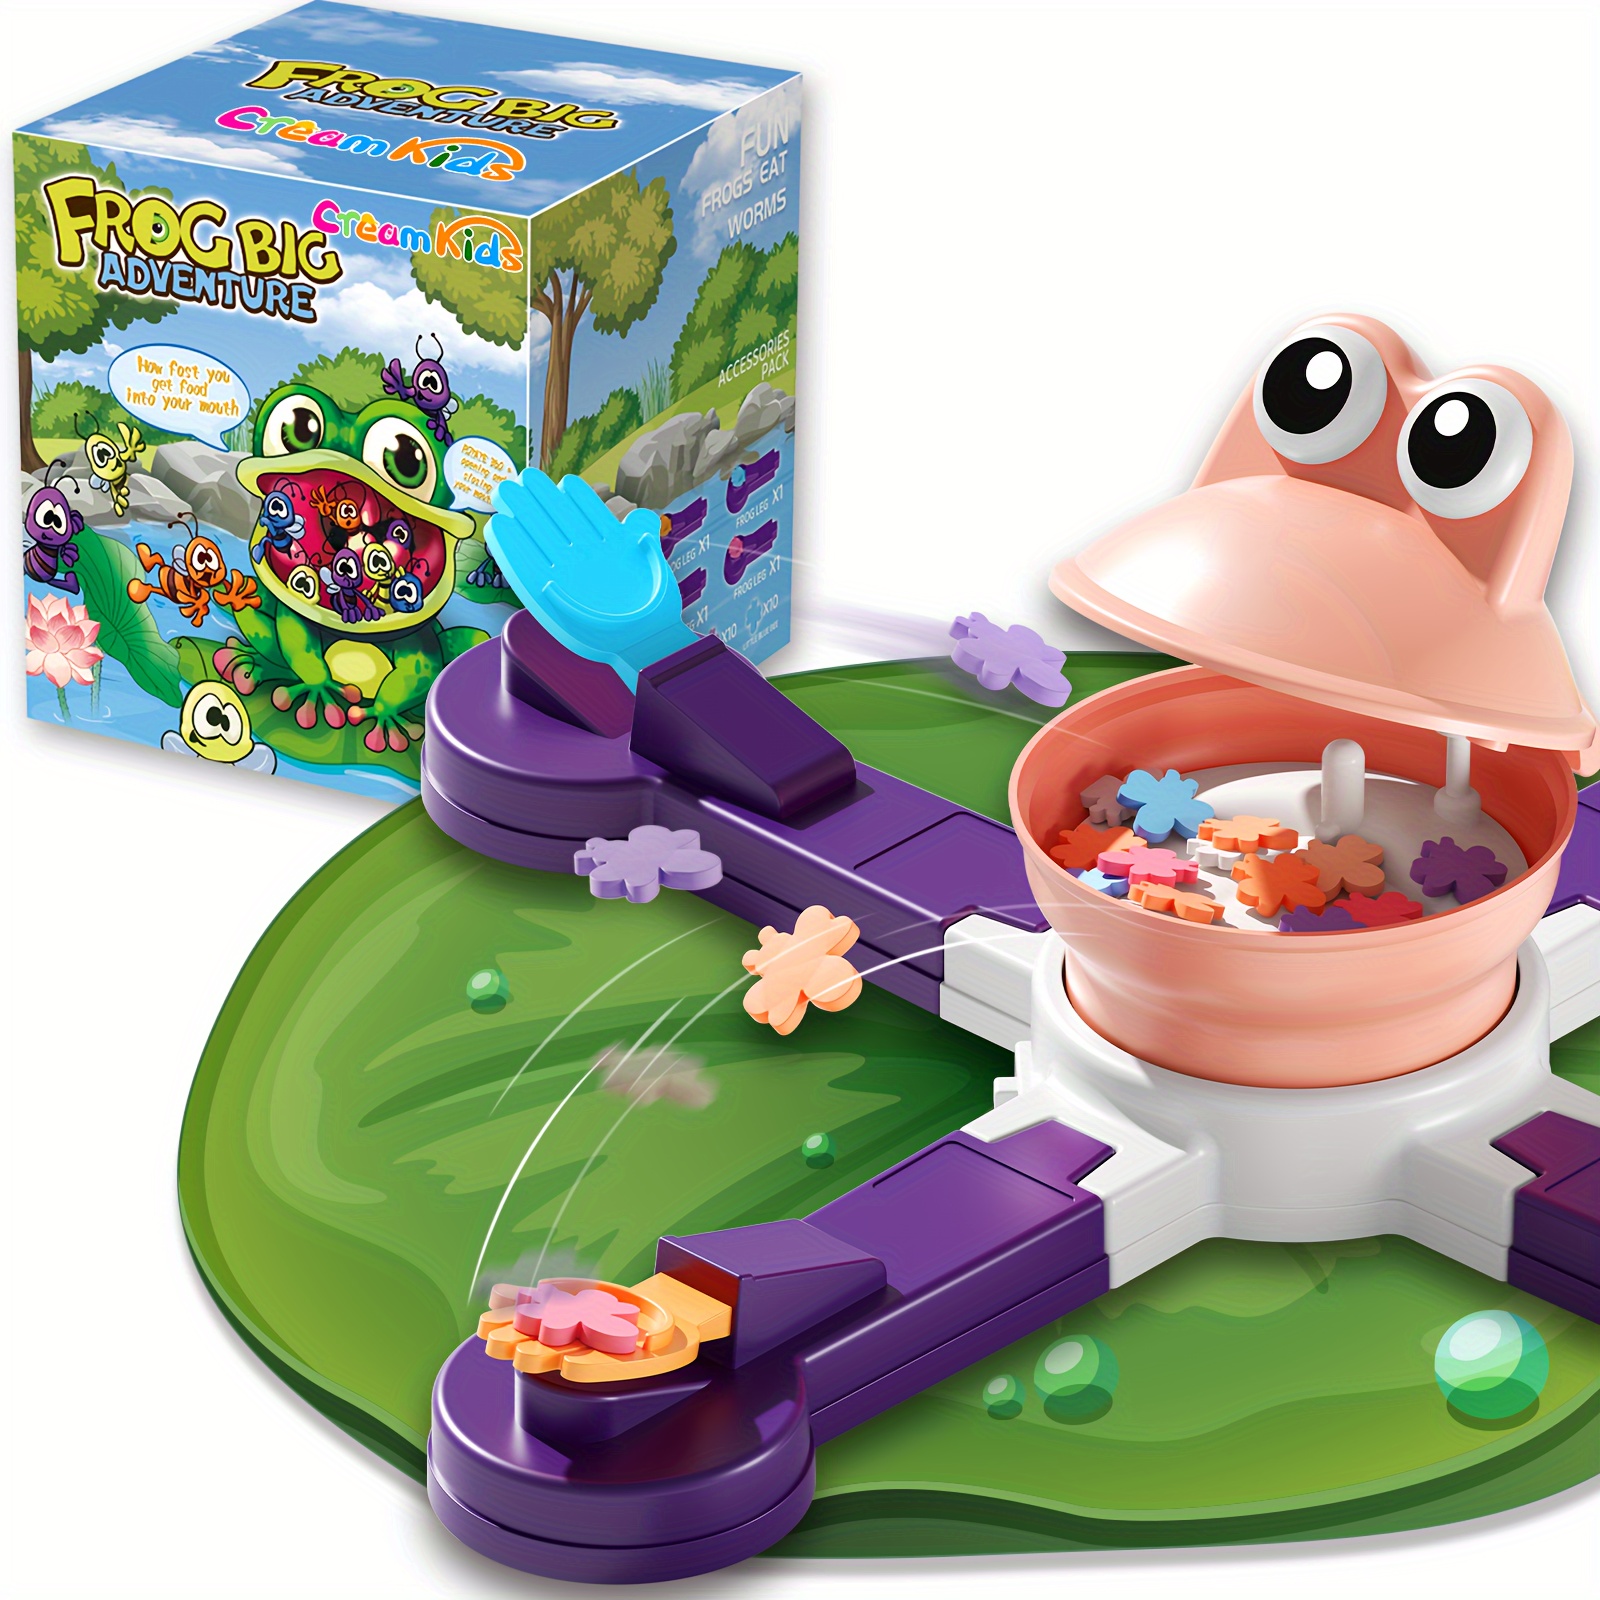 

Creamkids - The Board Game By Frog Feeding Game, Frog Eat Bees Competitive Game, Family Board Games For 1 To 4 Players, Play Solo-multiplayer-teams, 15 Minute Playing Time